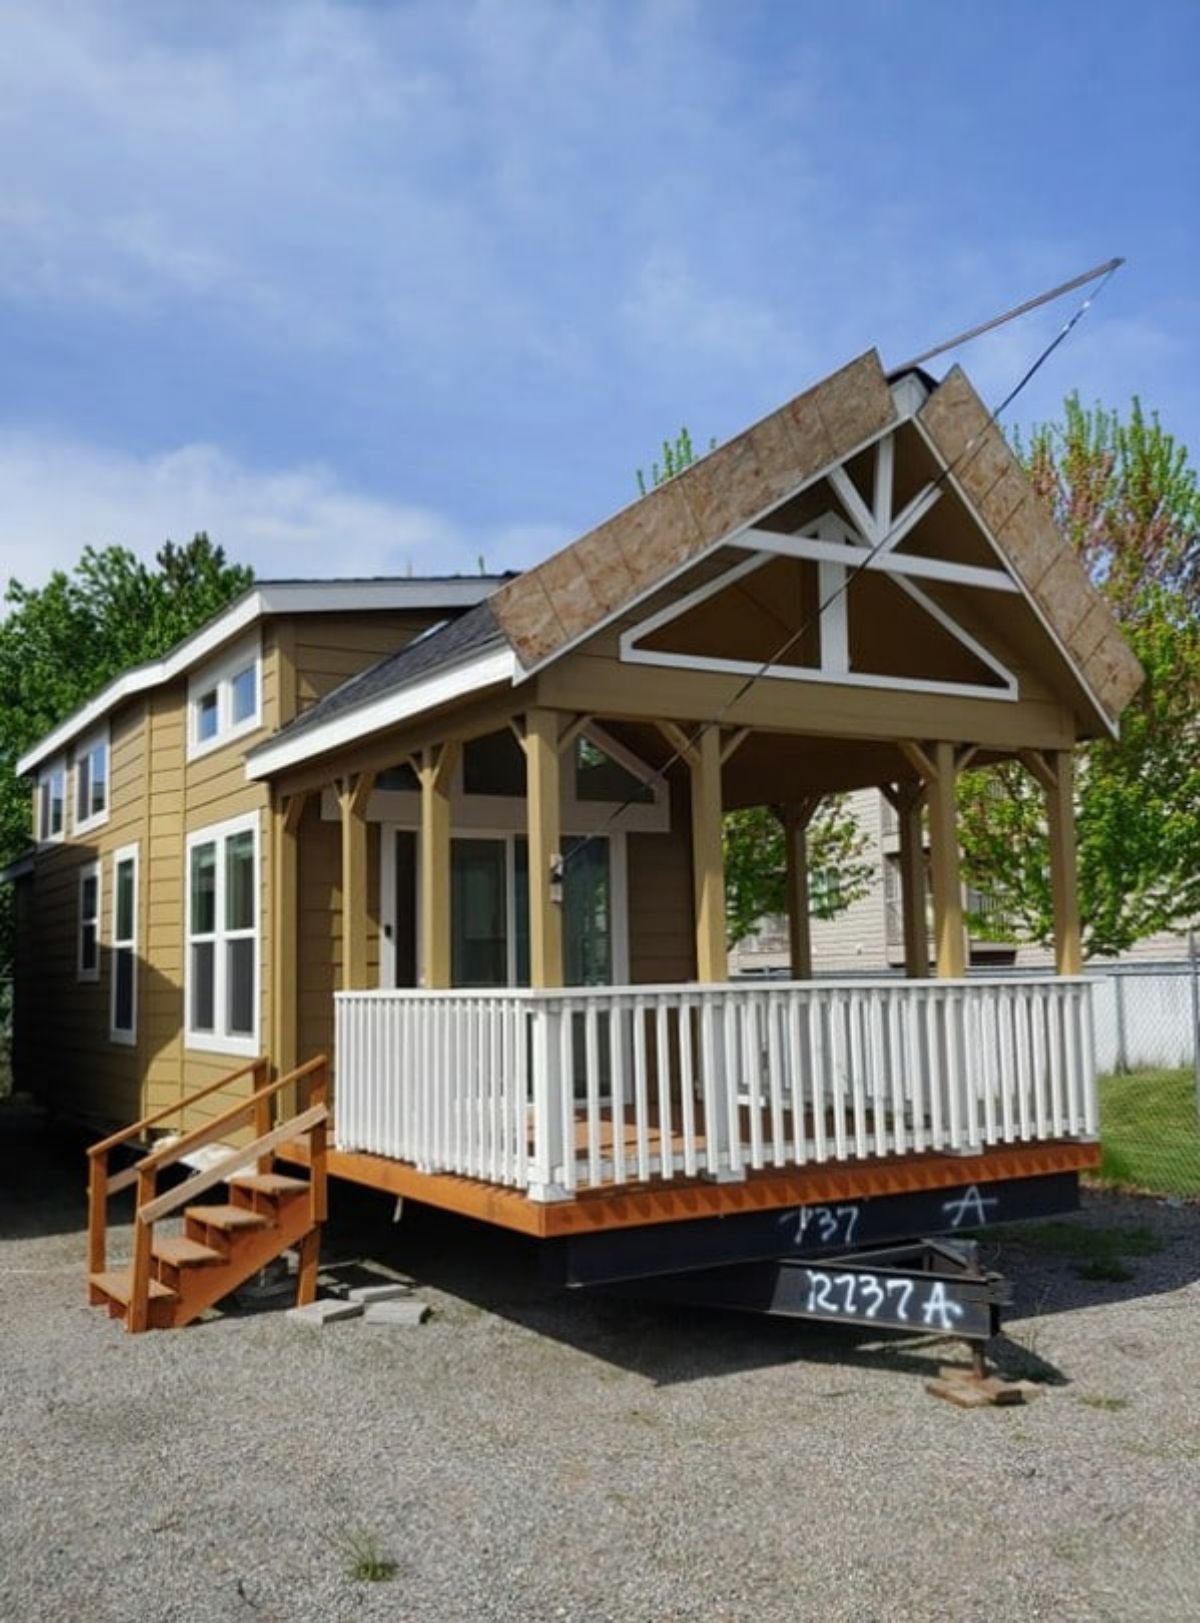 Park Model Homes Tiny House With a Huge Porch